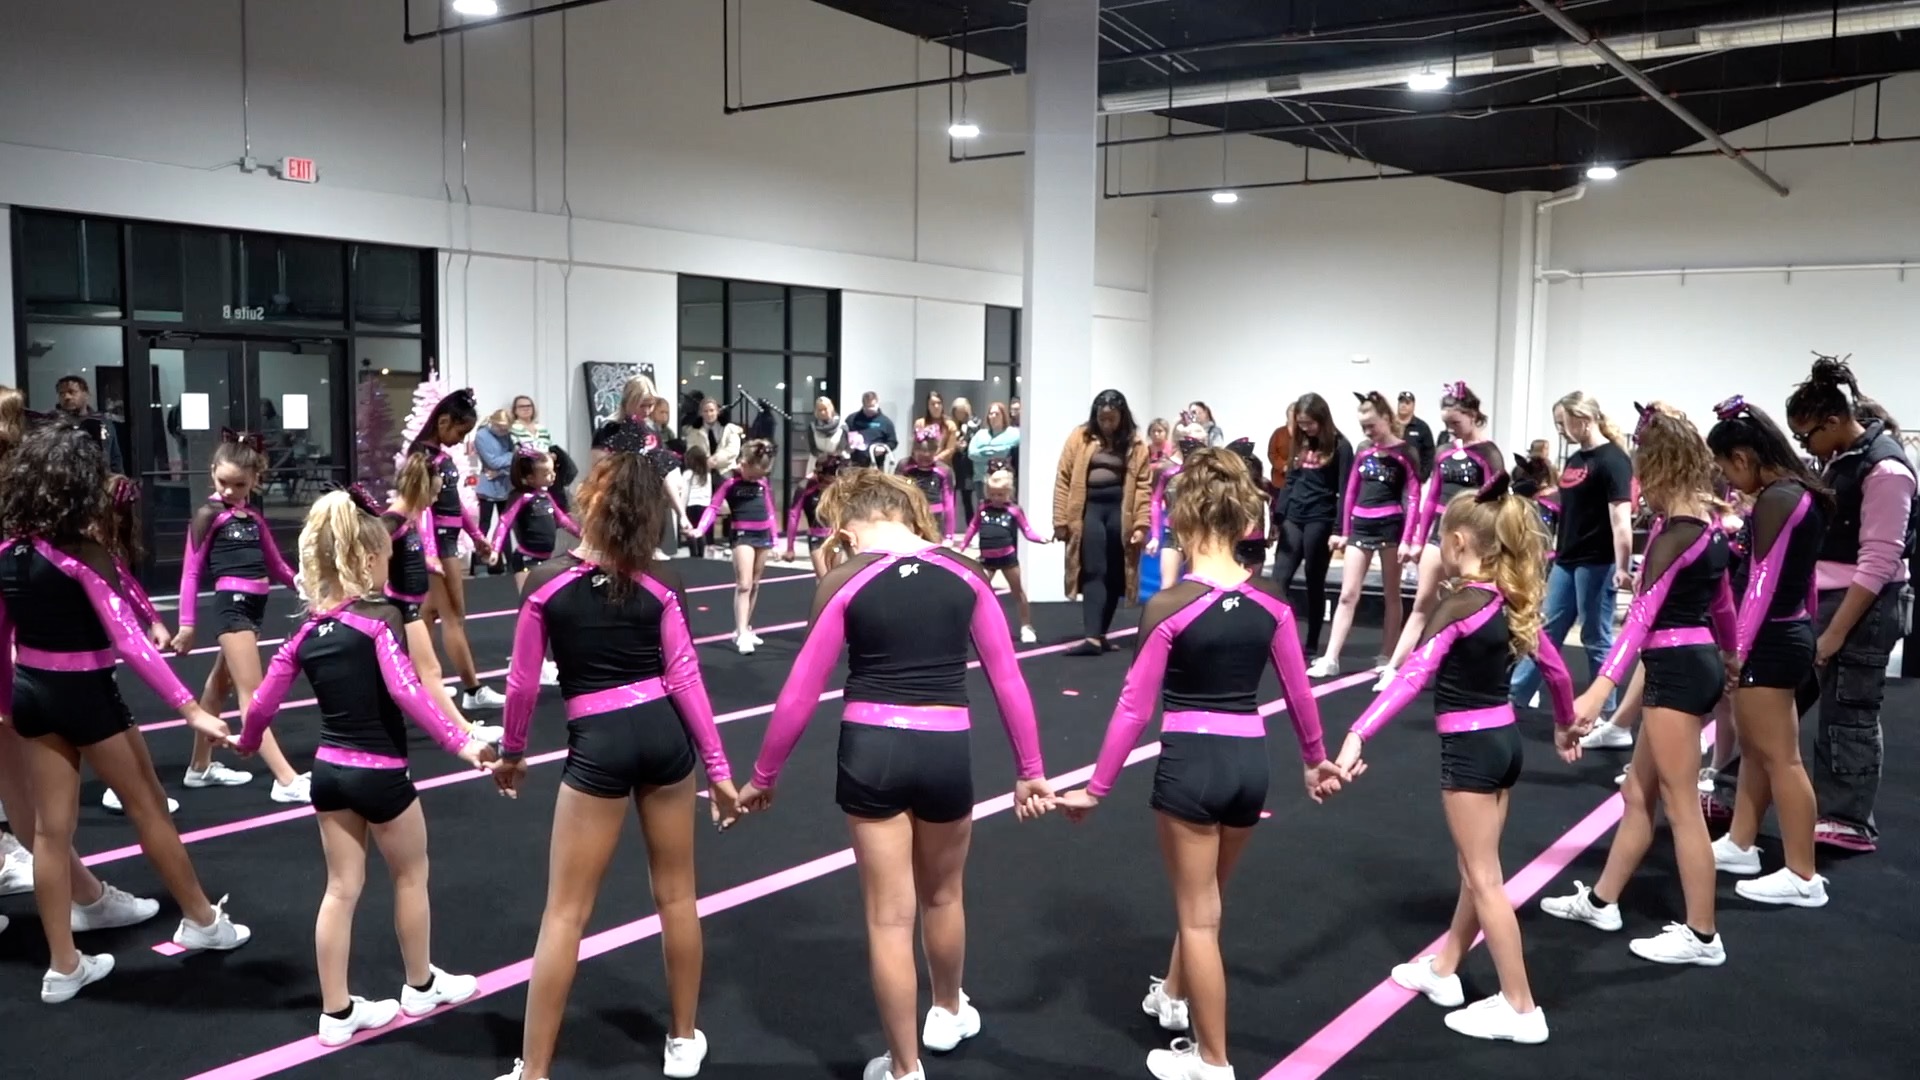 About two dozen young people hold hands with their heads bowed in a circle. They wear pink and black dance wear and white sneakers.